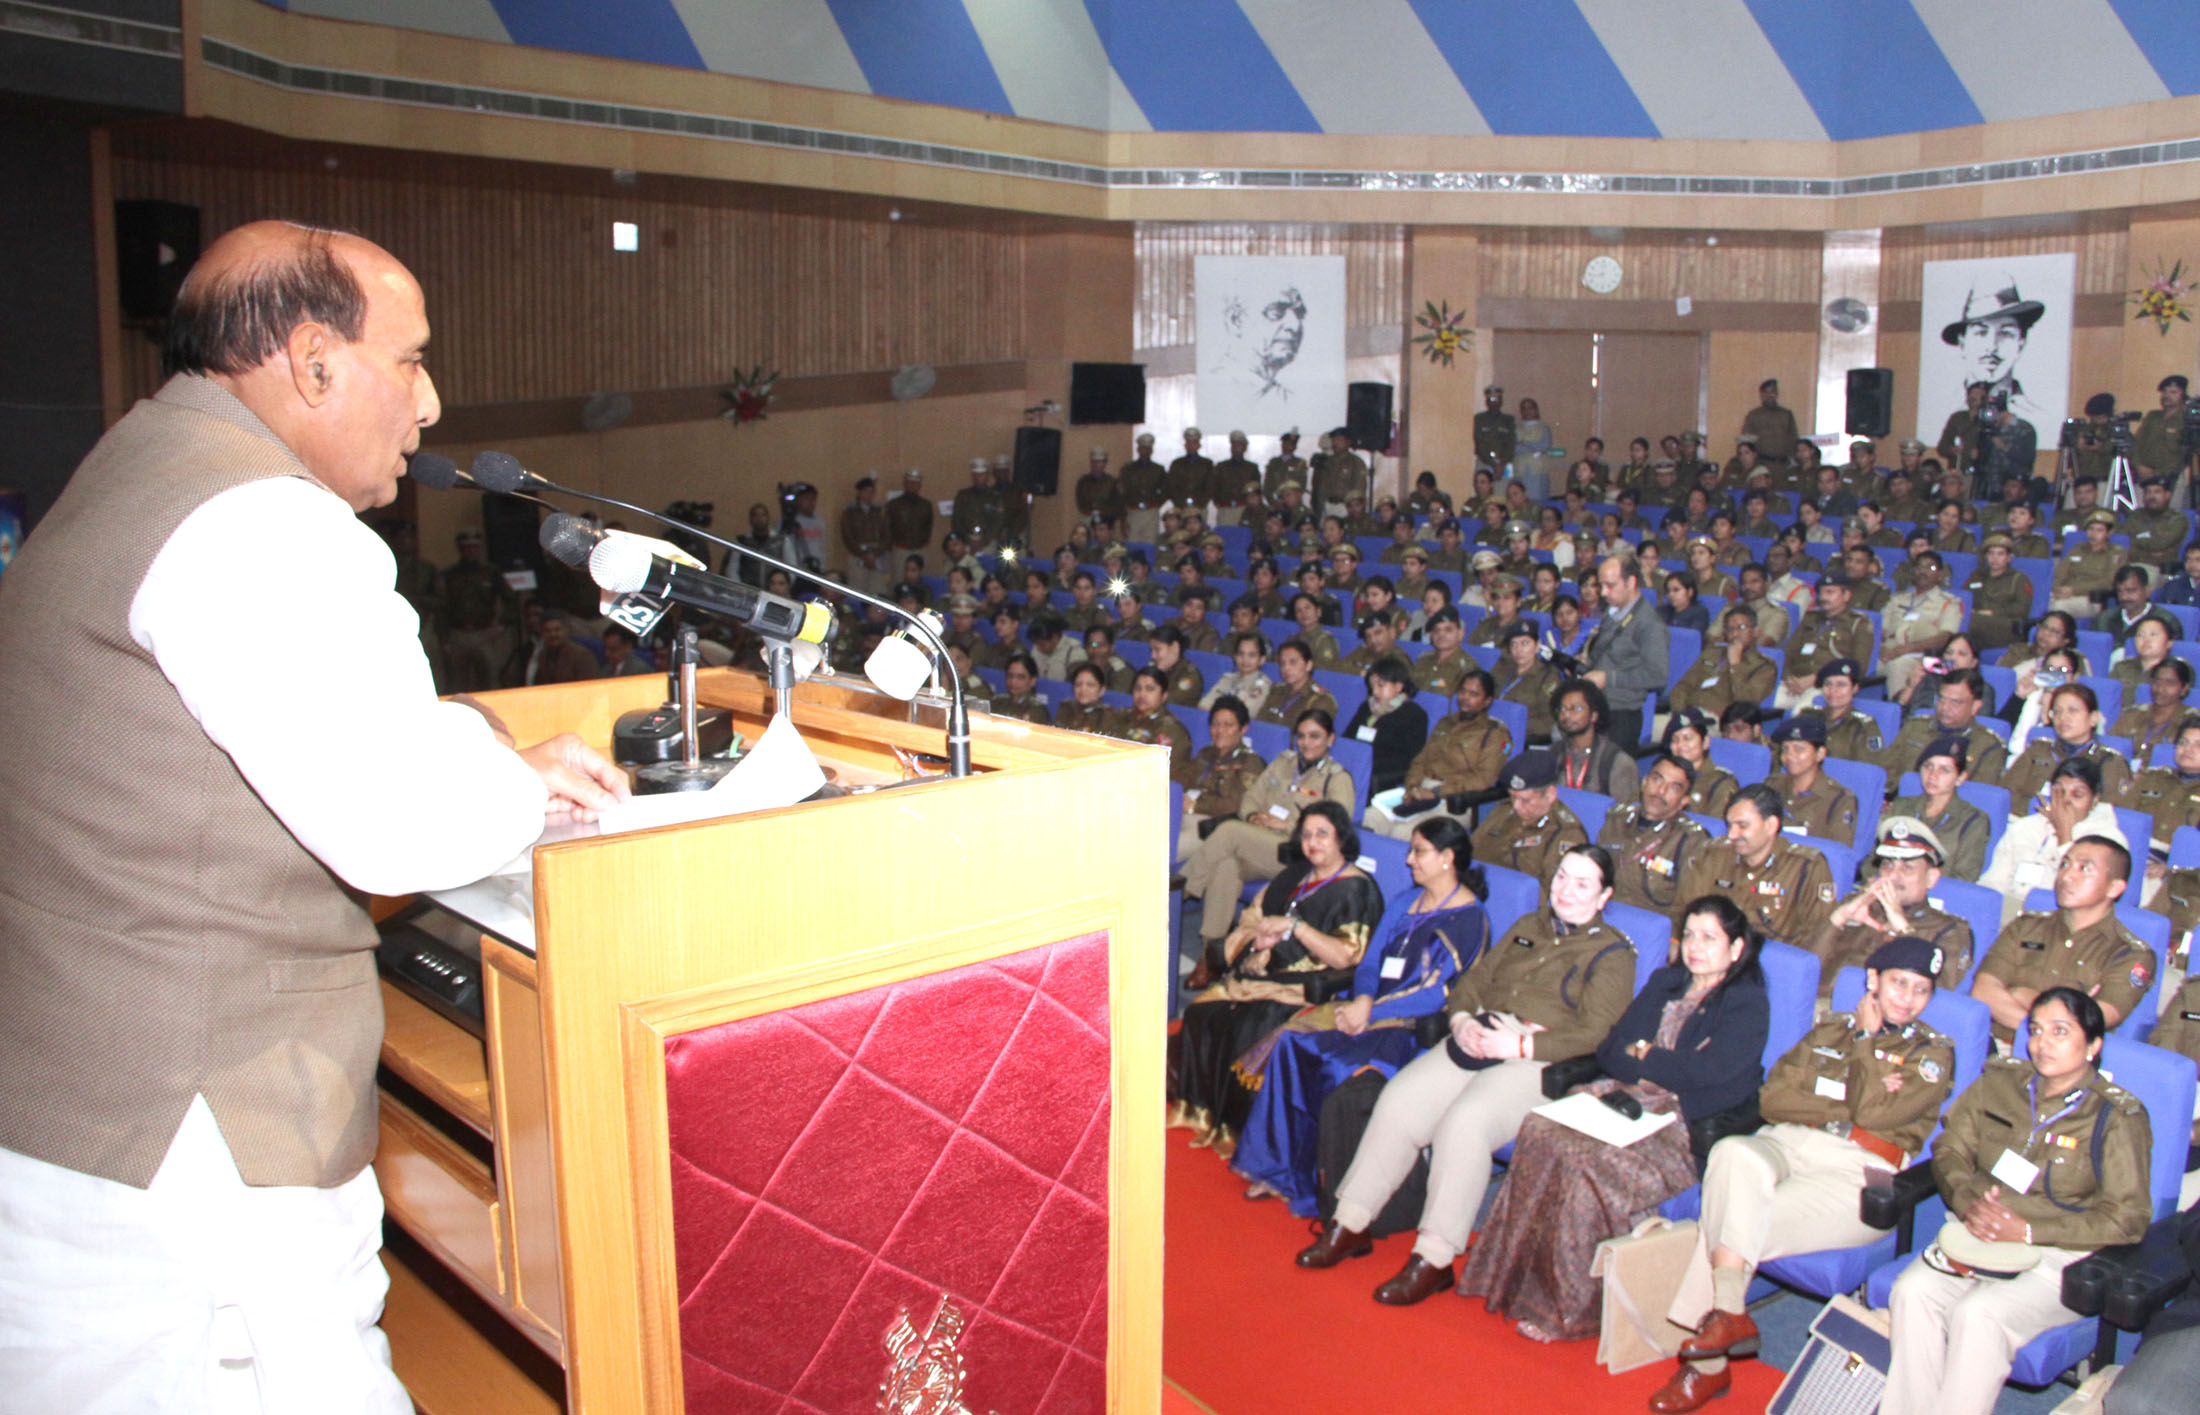 The Union Home Minister, Shri Rajnath Singh addressing at the inaugural session of the 7th National Conference on Women in Police, at CRPF Academy, in Kadarpur, Gurgaon on January 06, 2016.